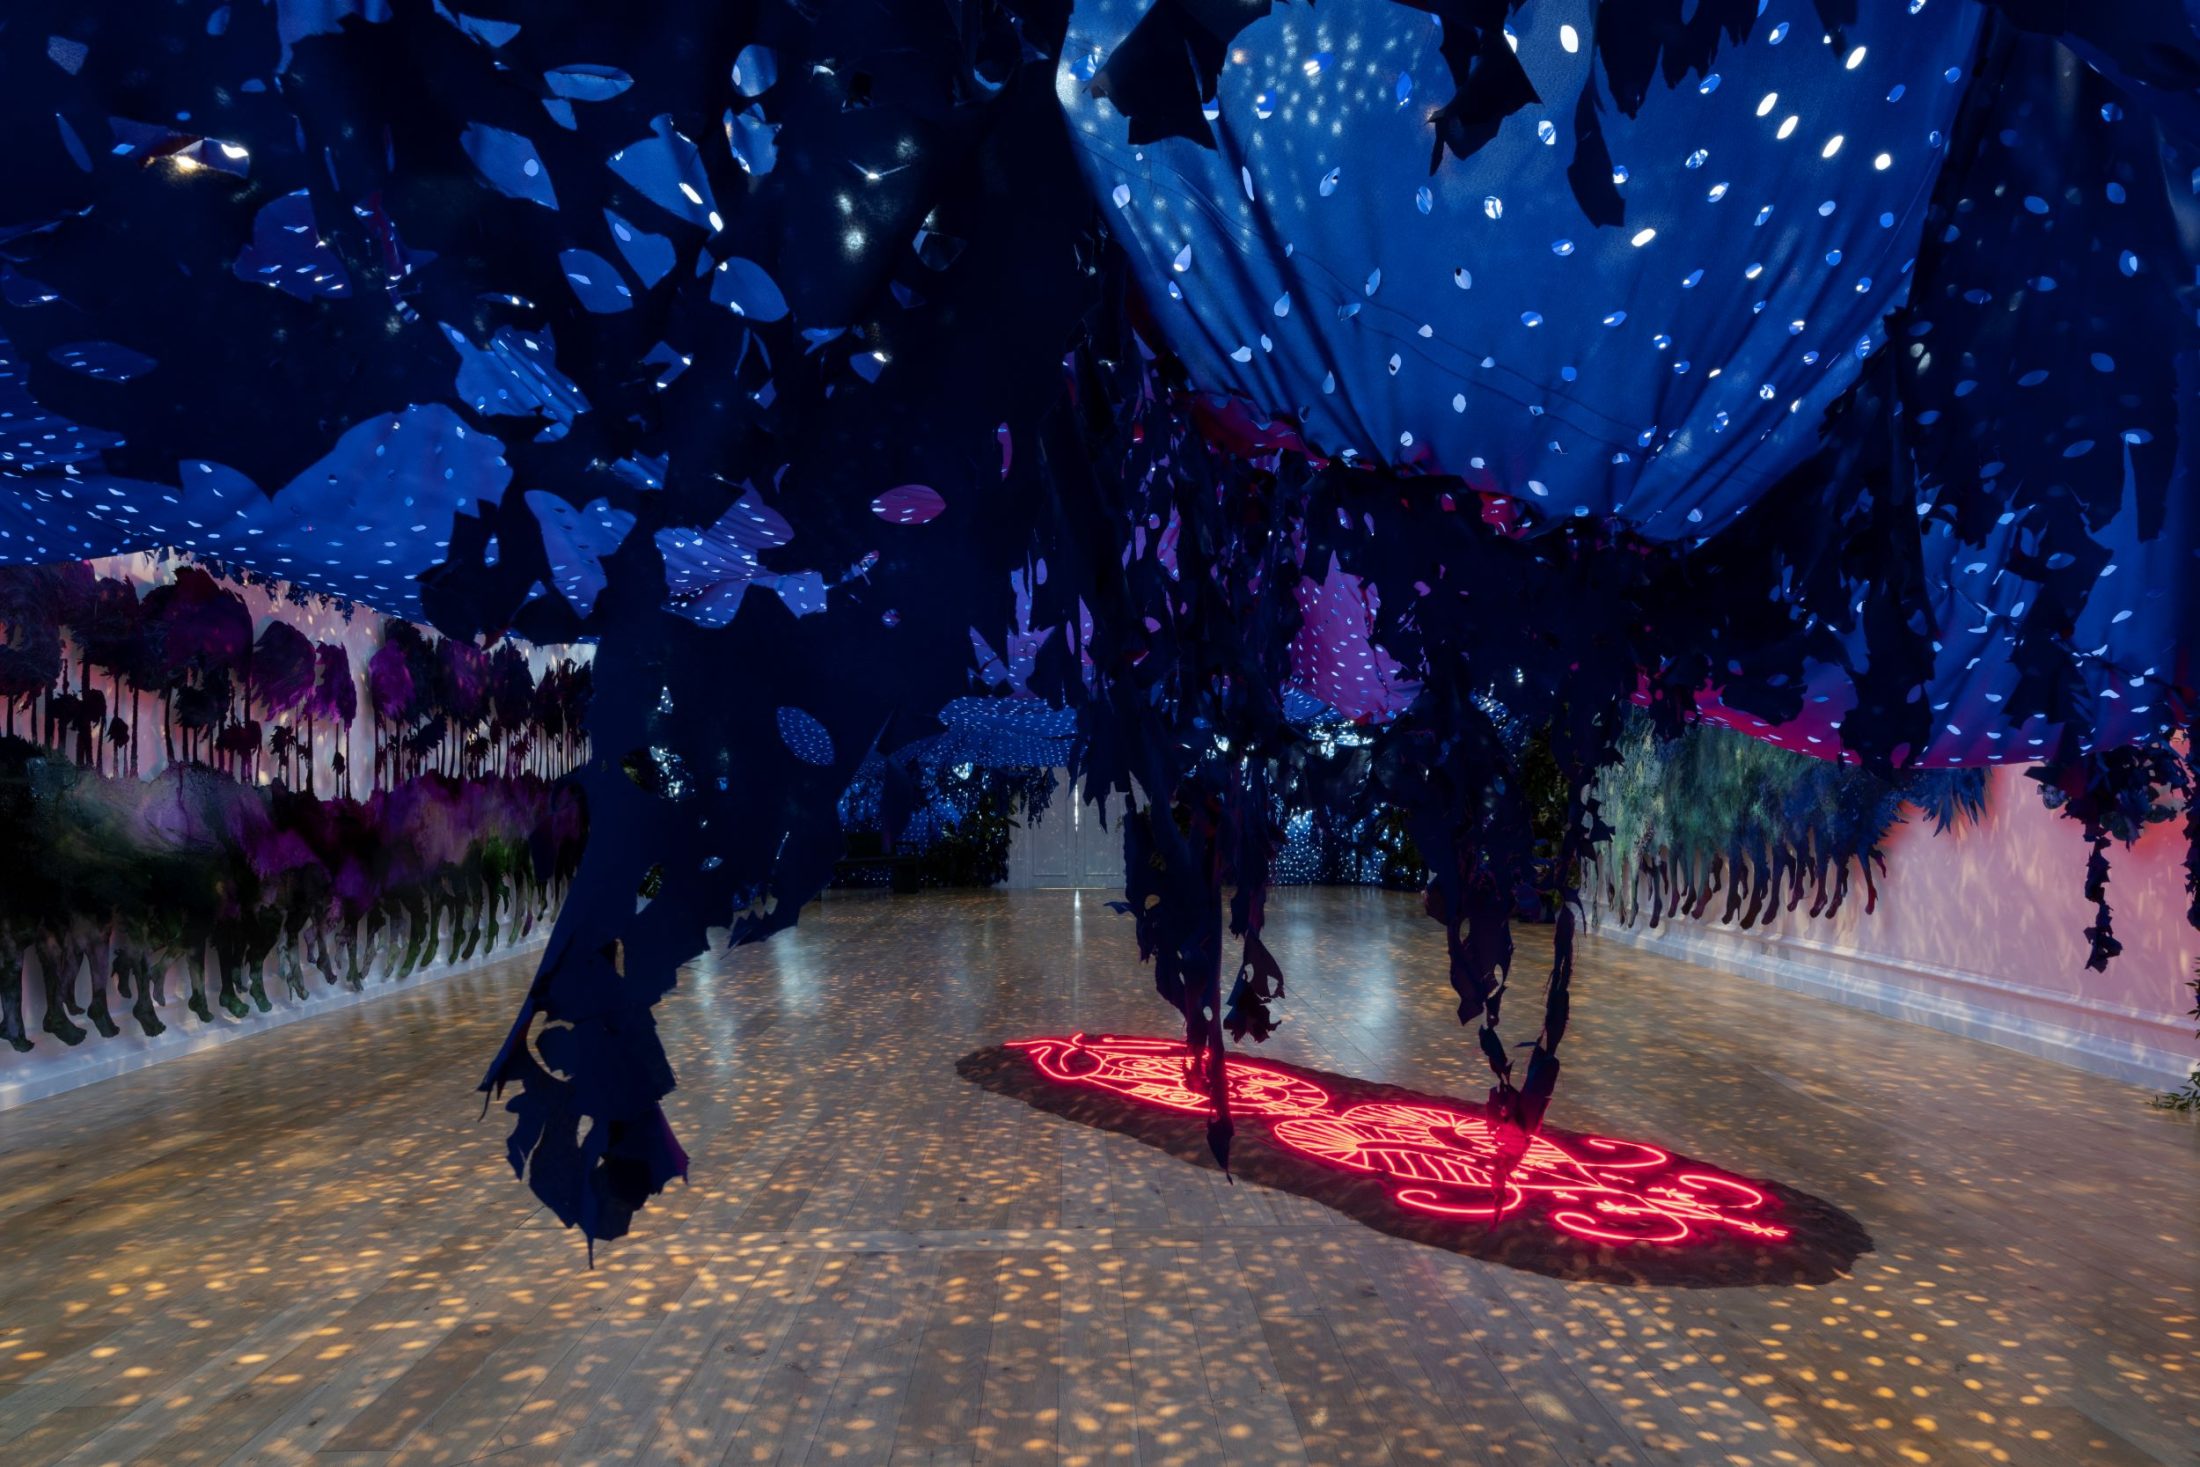 An immersive installation with blue ripped tarp hanging from the ceiling. A neon deity image glows red on the floor.